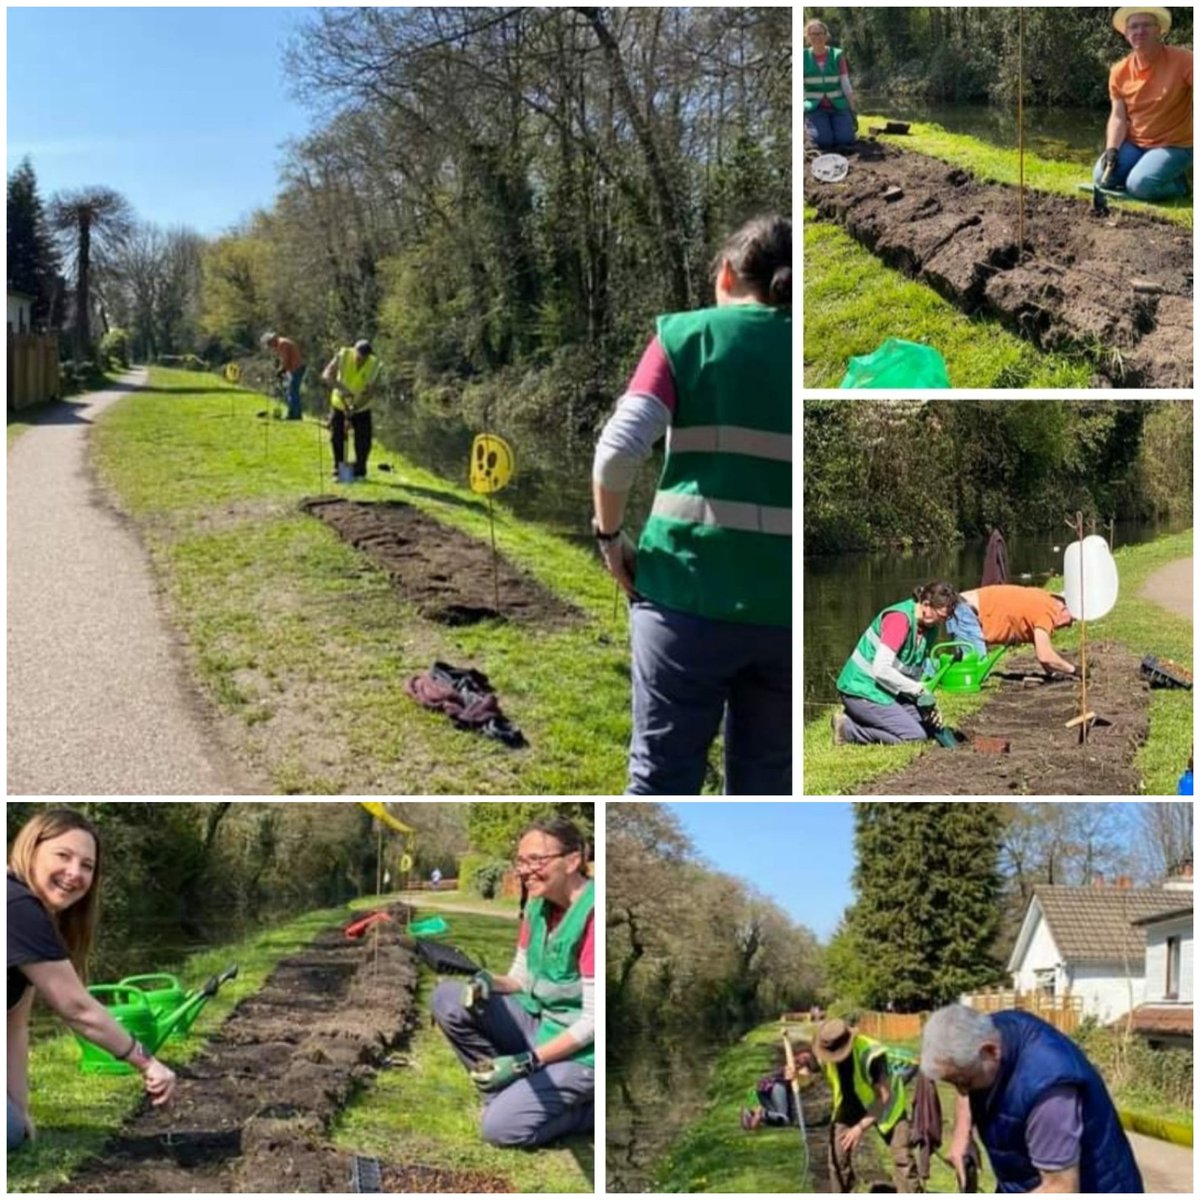 What a glorious 1st day for the Pont-t-ddol planting project. The sun was shining and the birds were singing. Thank you to all the volunteers who gave their time today. It was great to work with you. @CanalRiverTrust @peakcymru @nature_cic #communityplanting #wildflowers #happy